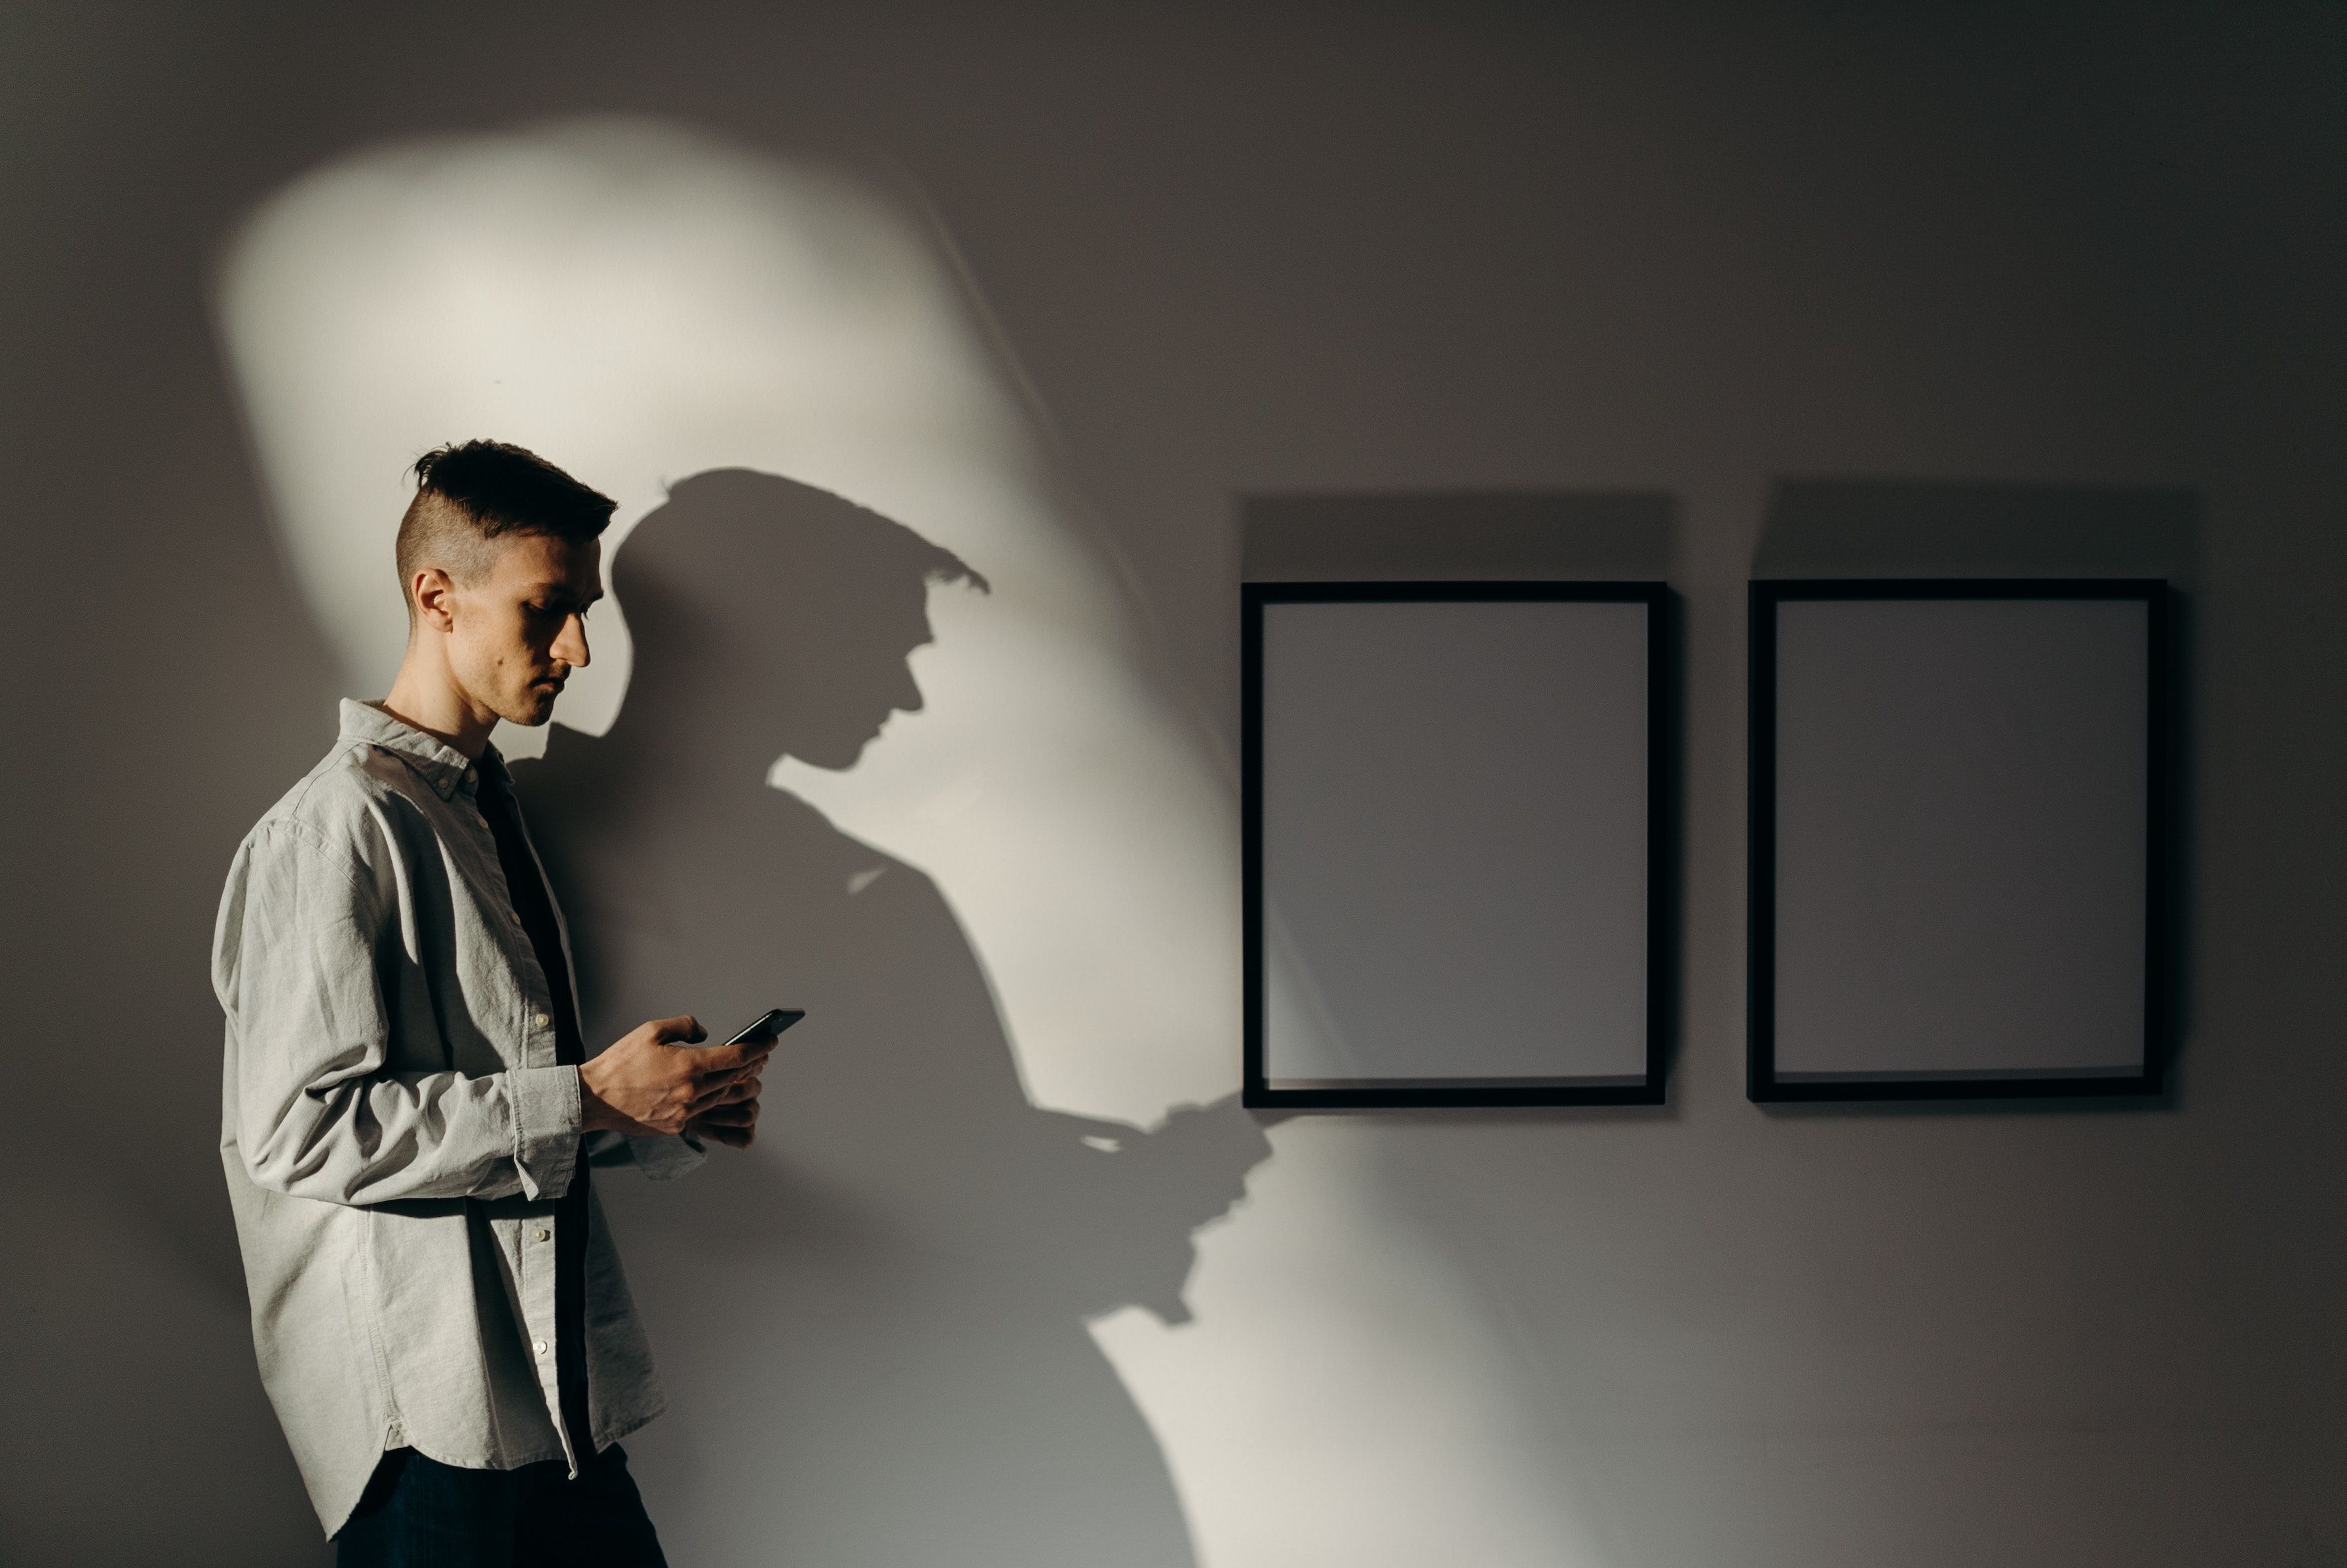 In a dark, window-lit room, a man in collared shirt looks down at his phone beside two empty wall frames